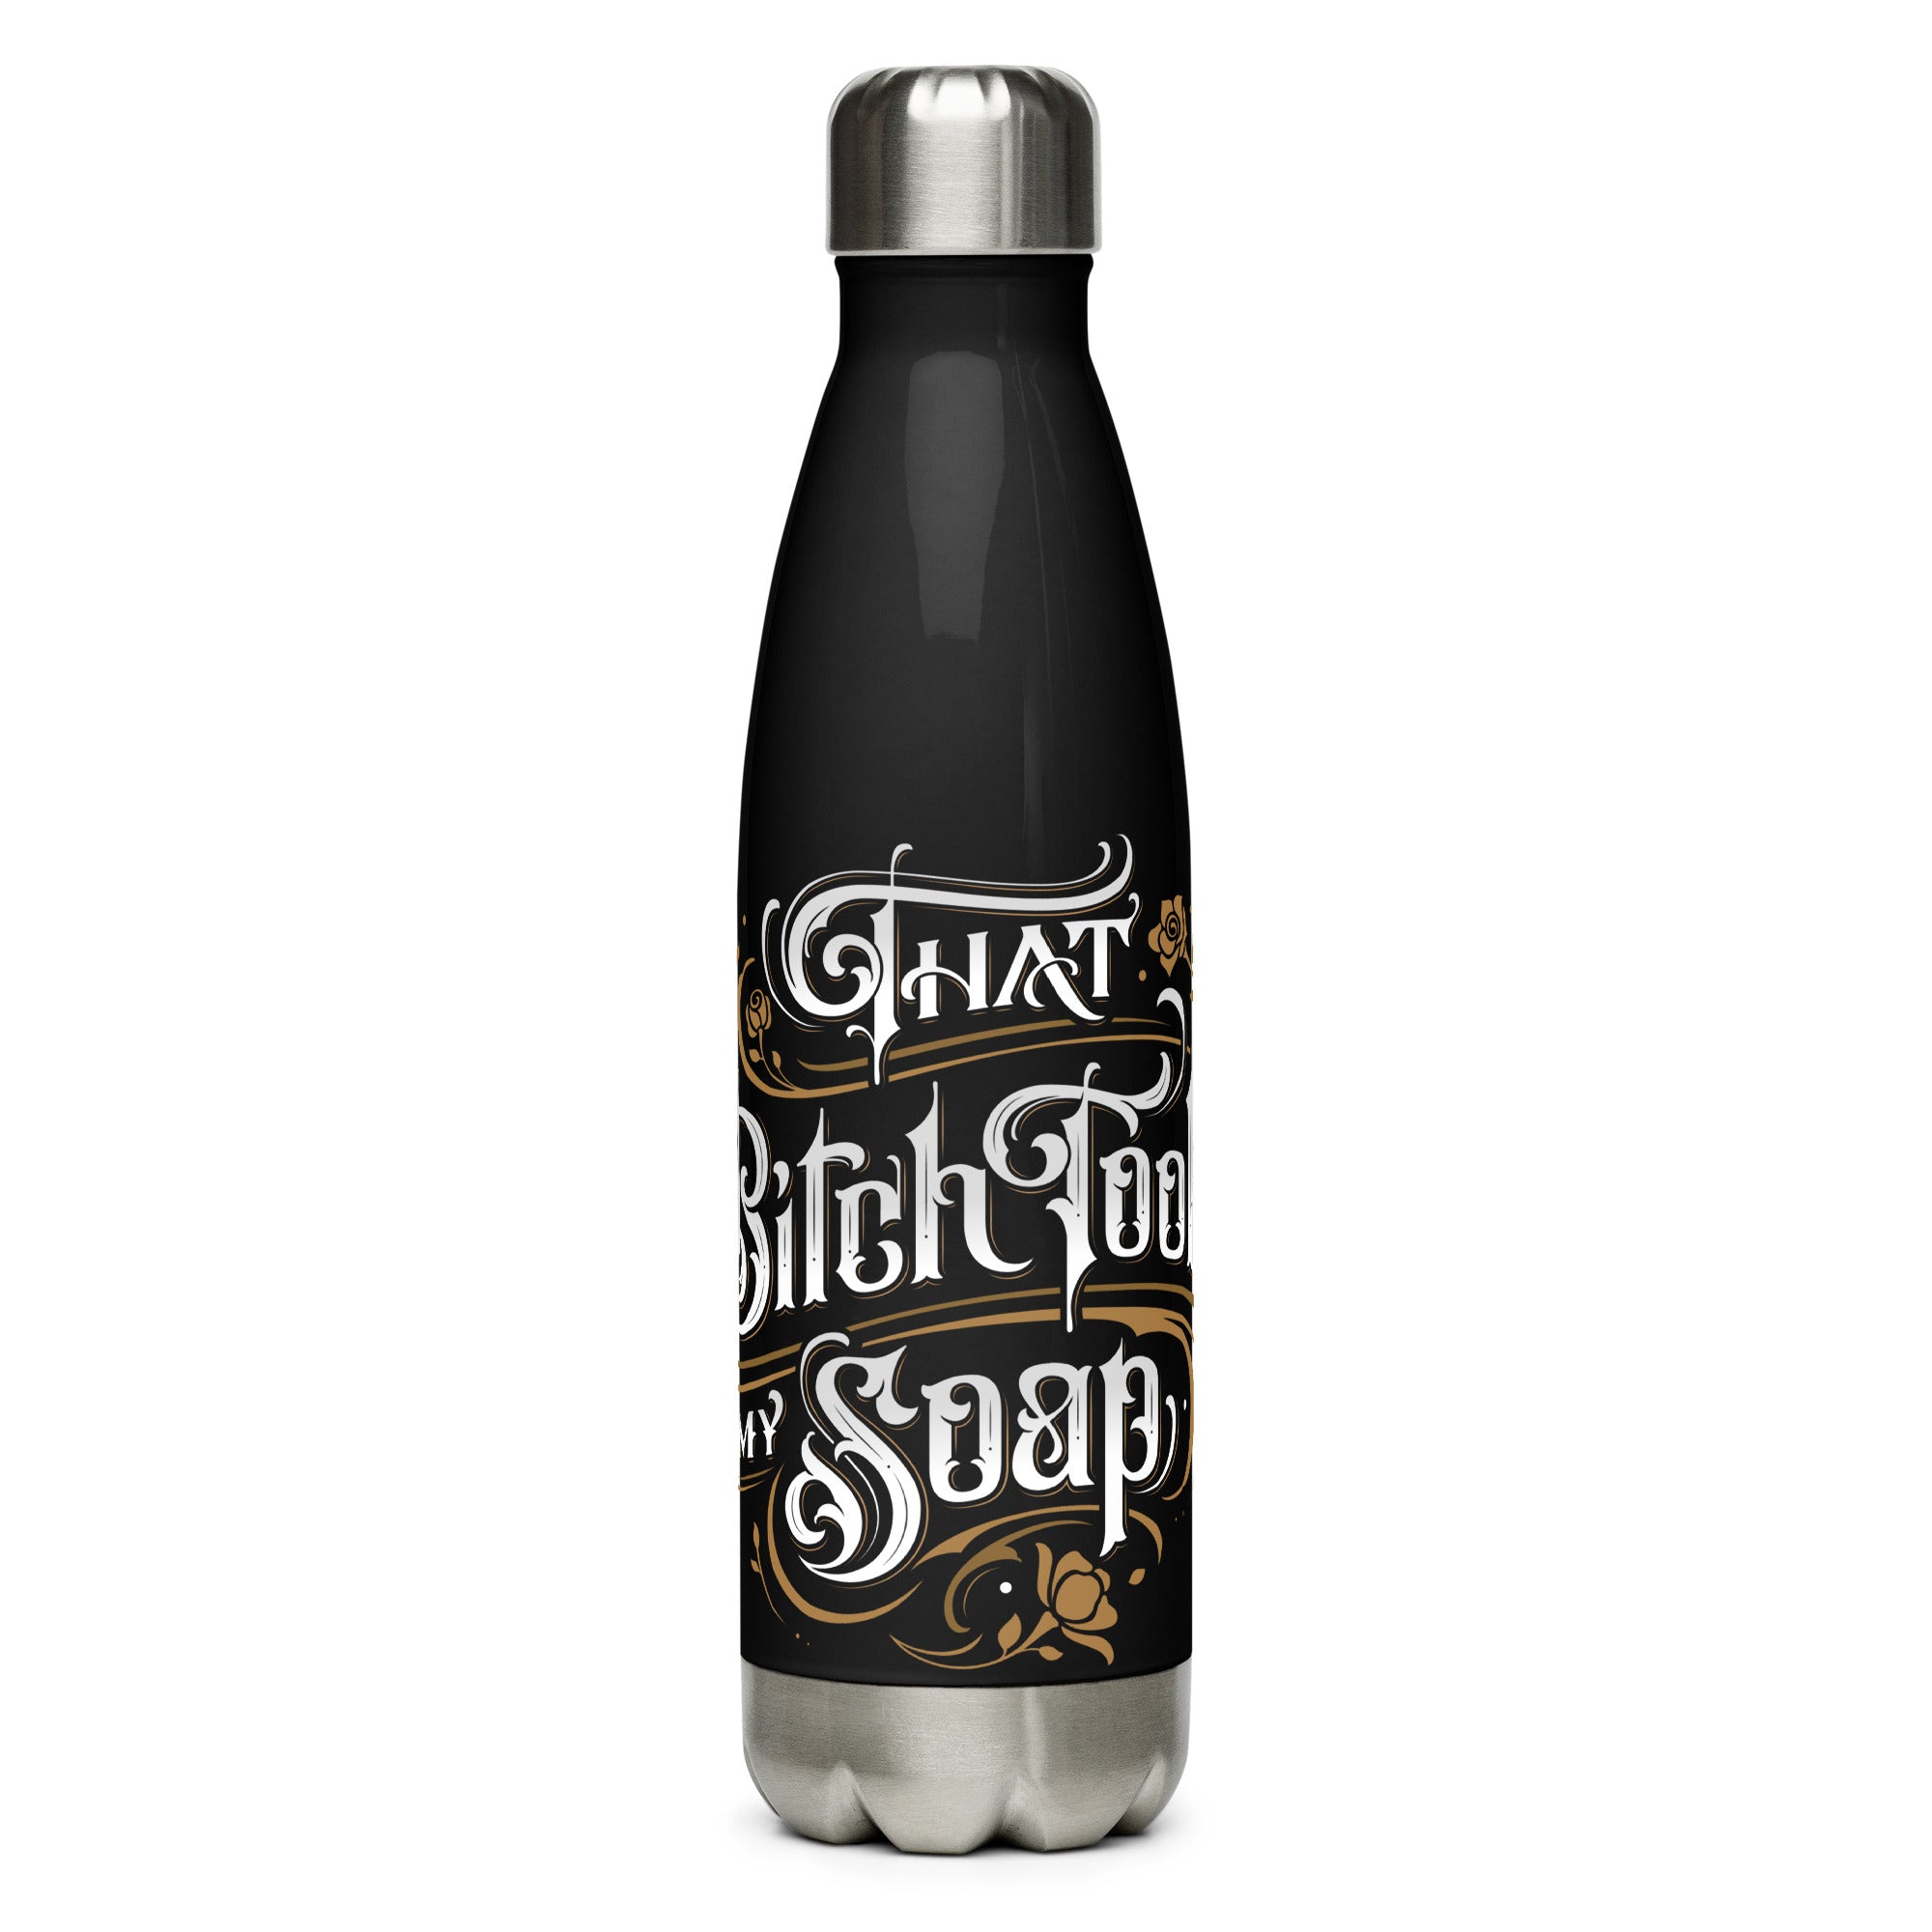 "That bitch took my soap" stainless steel water bottle